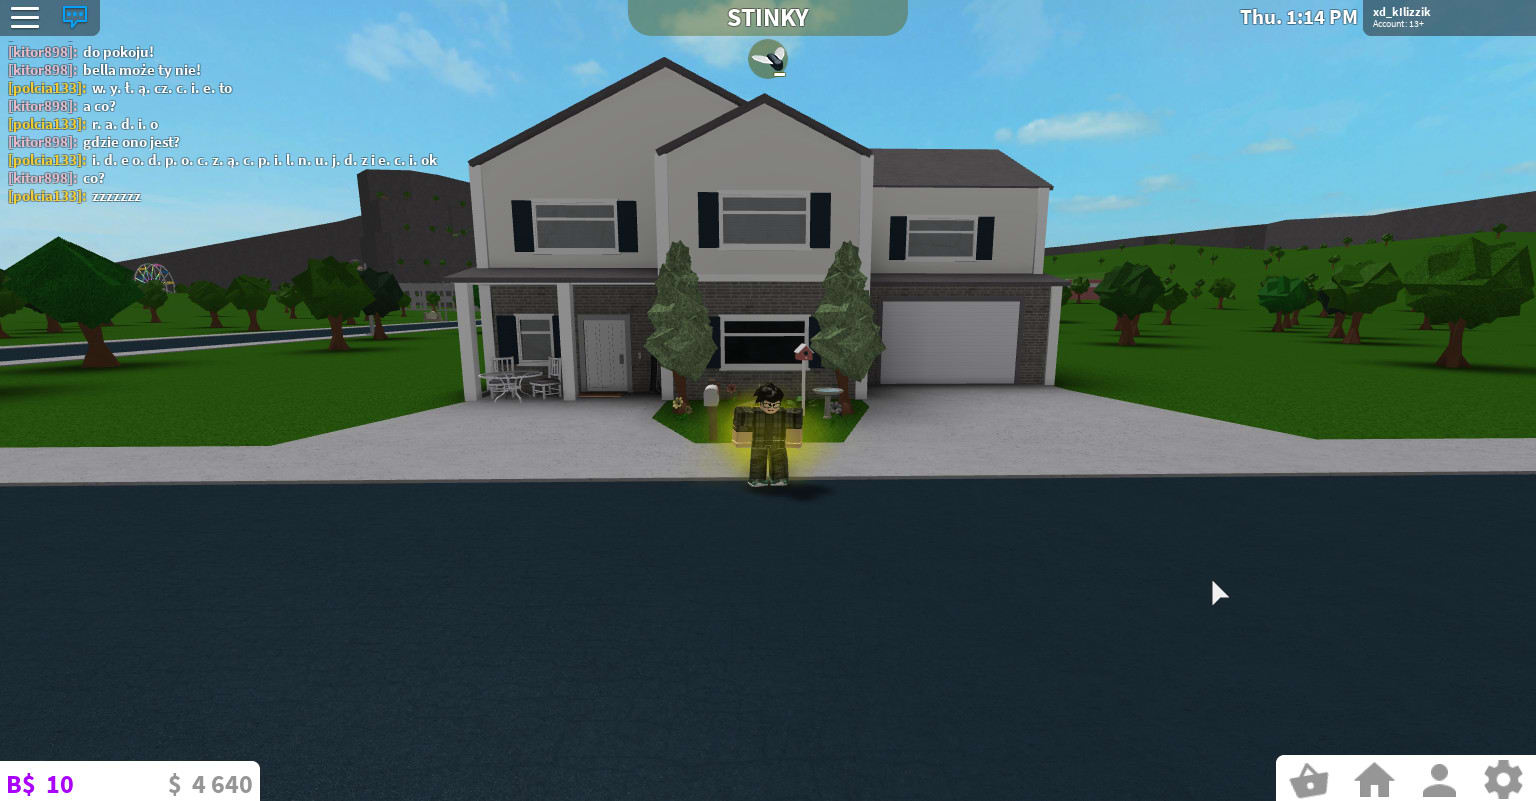 Build You A House In Bloxburg Roblox By Fortnitenuoogit - bloxburg roblox house for 40k